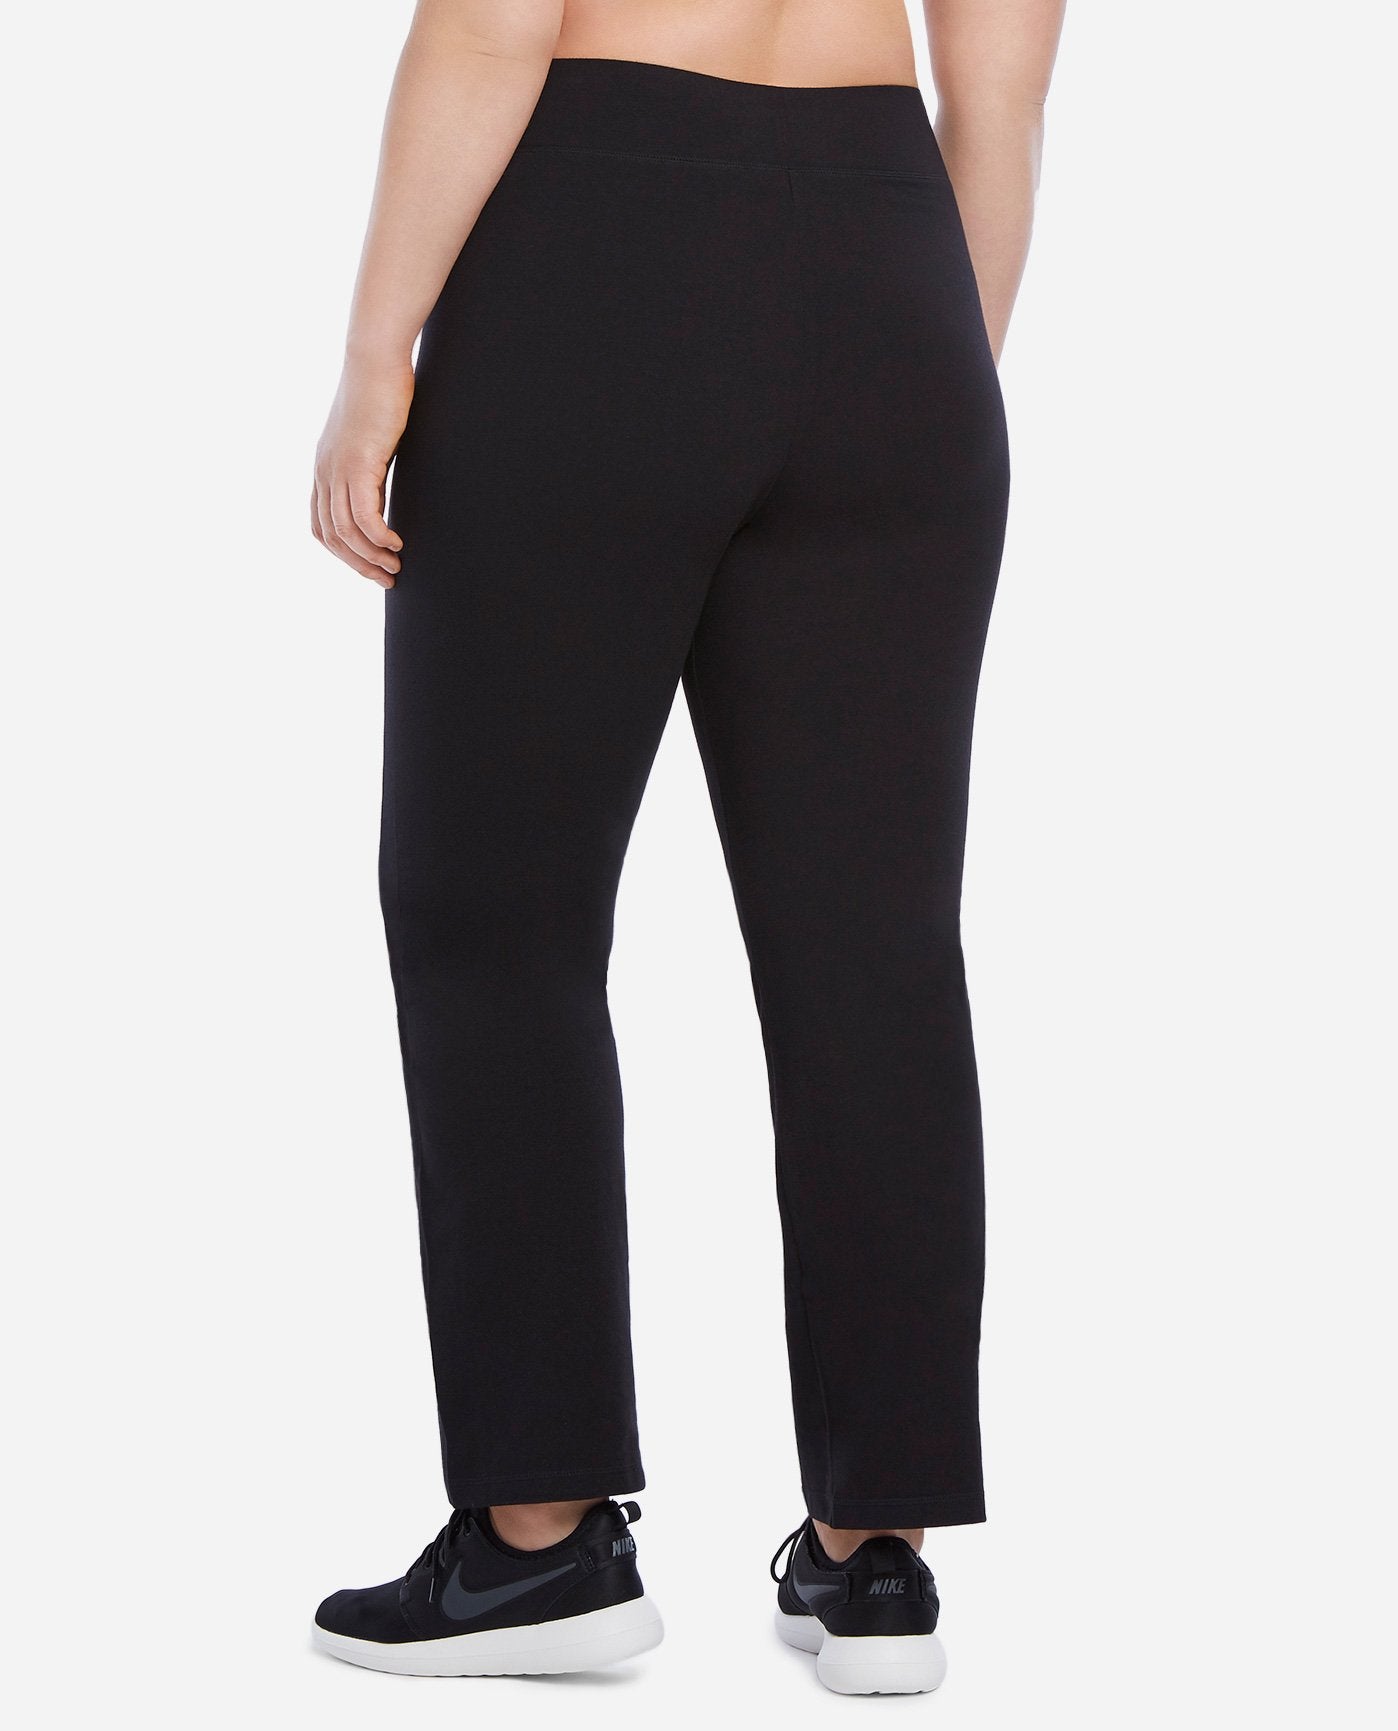 These $29 Yoga Pants With Pockets Have 13,000+ 5-Star Amazon Reviews